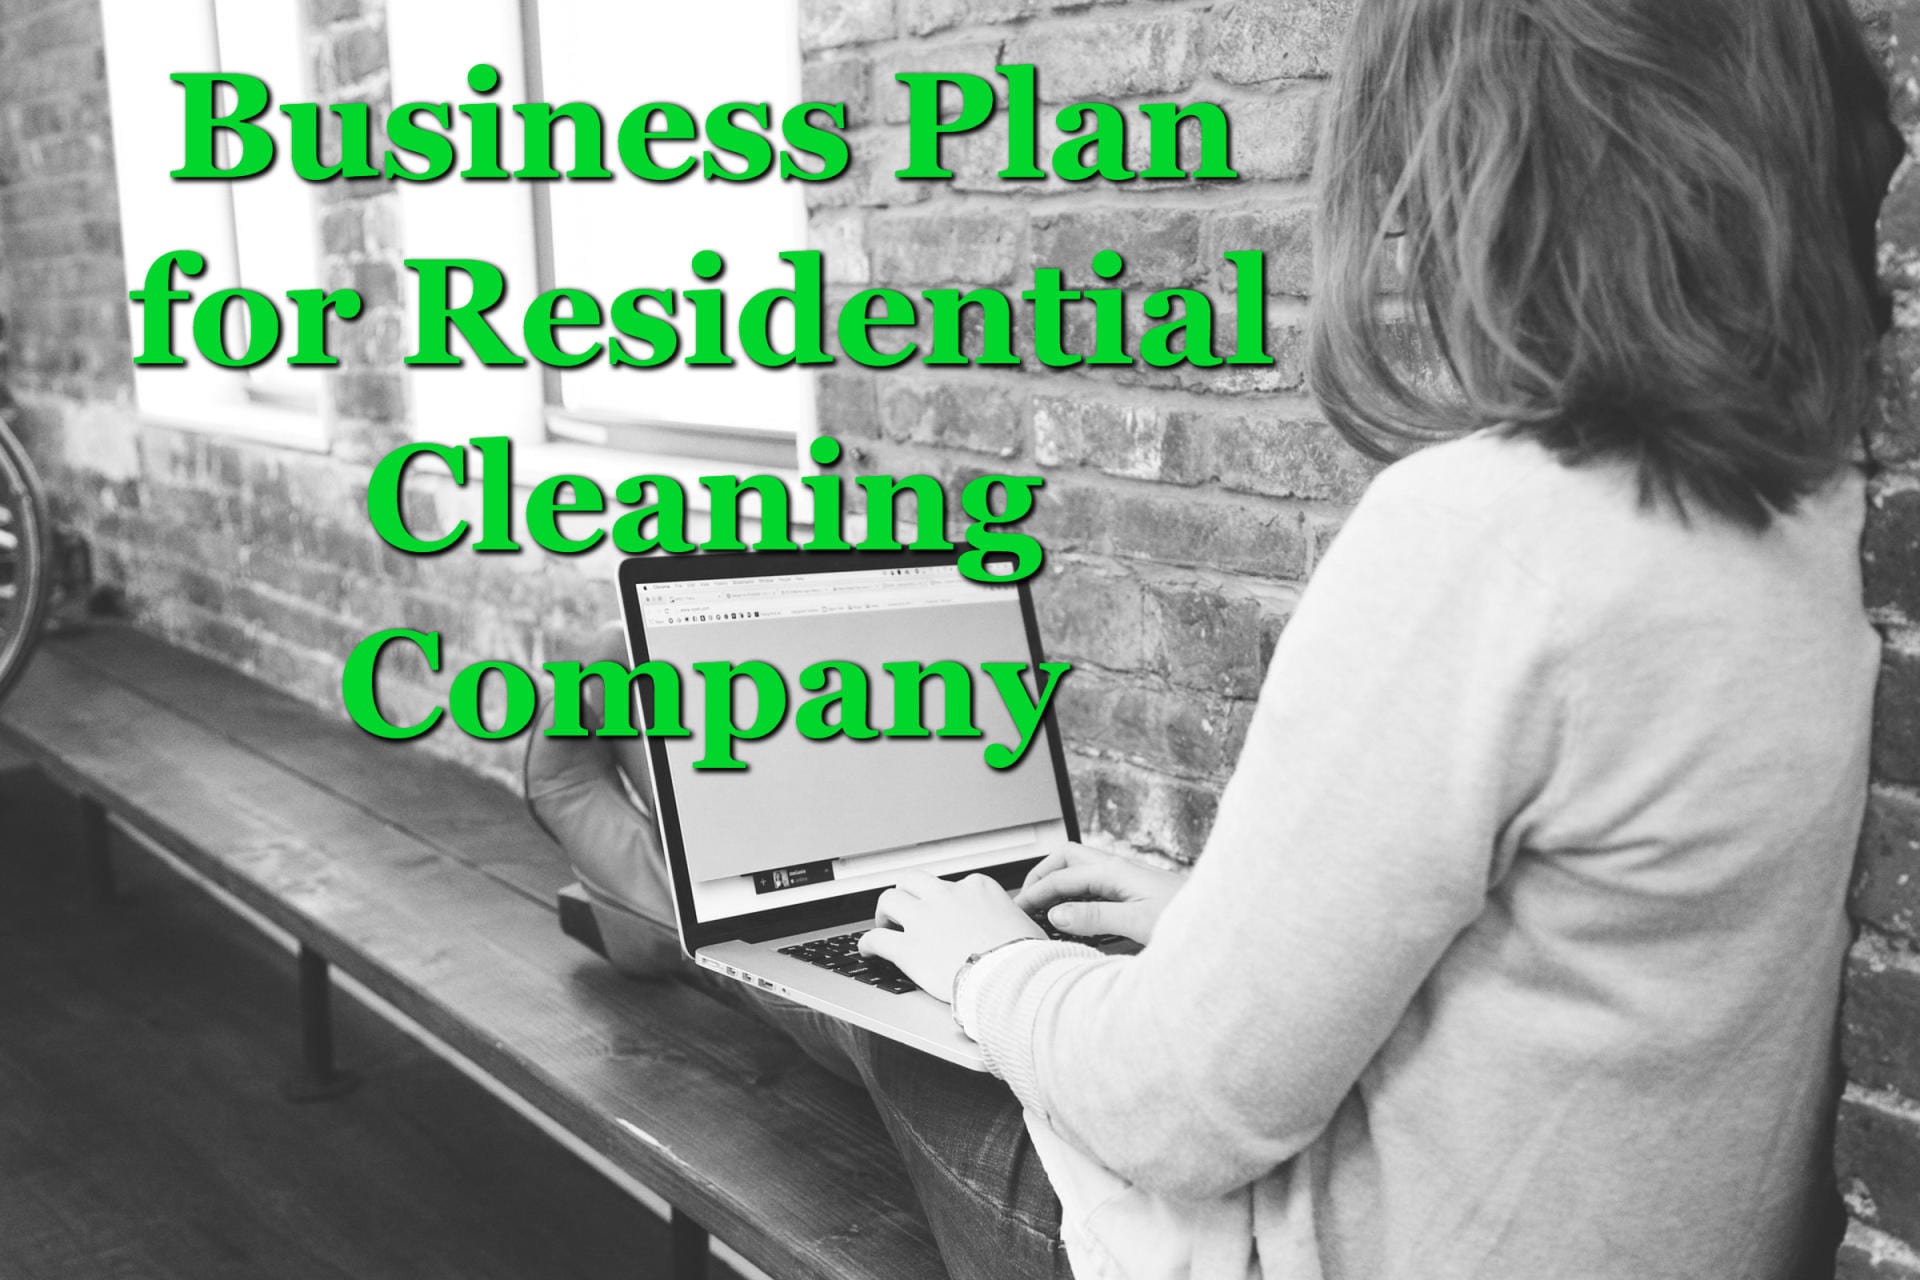 A woman at a laptop working on a business plan for a residential cleaning company